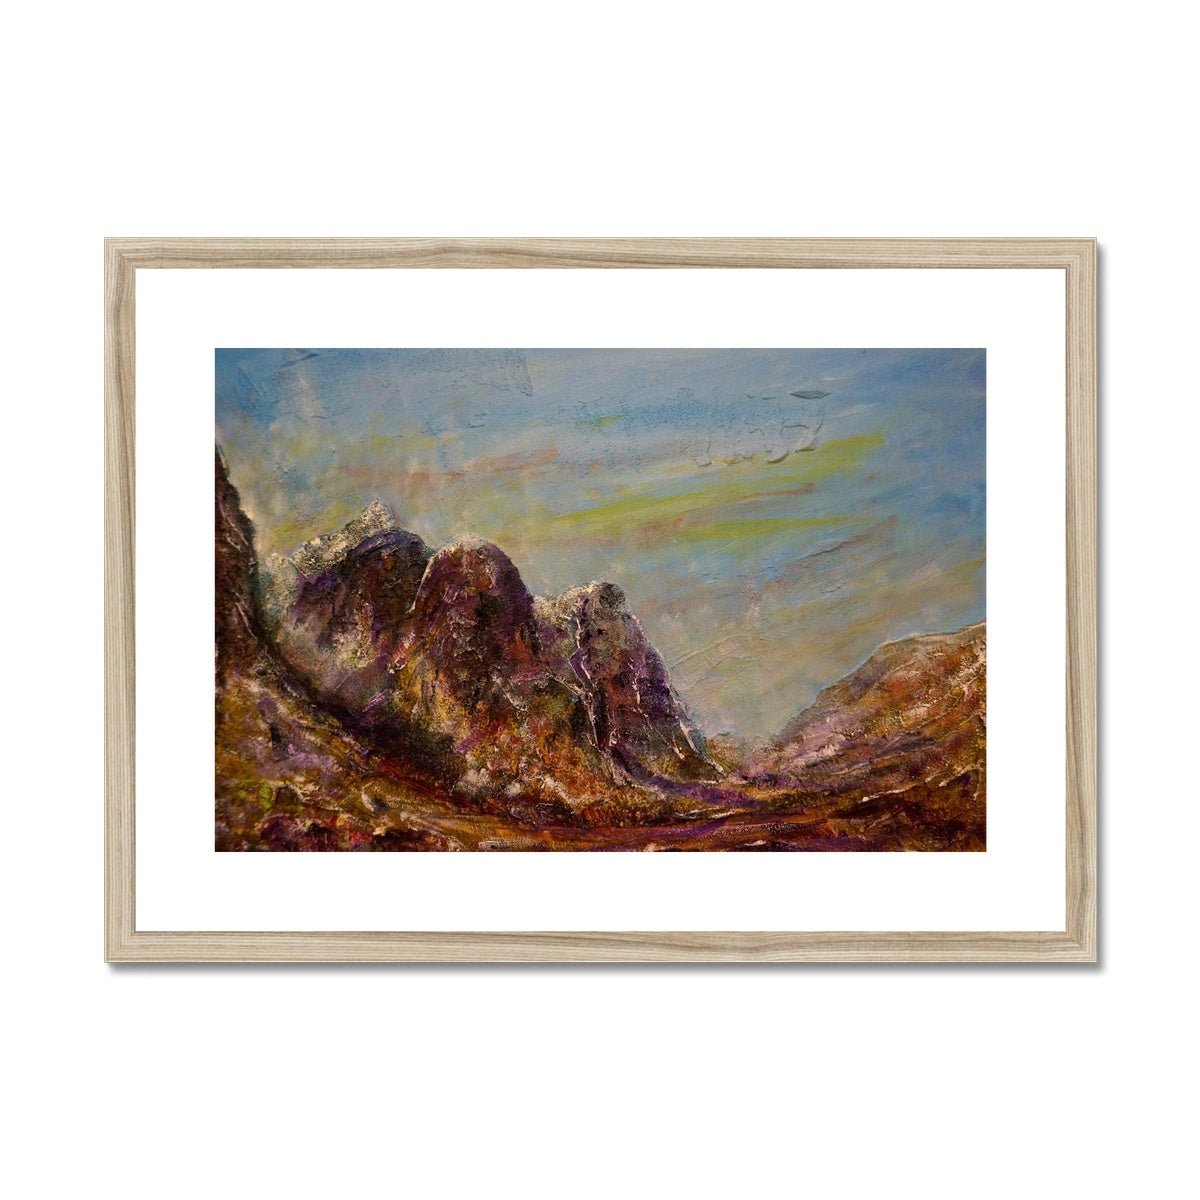 Three Sisters Glencoe Painting | Framed & Mounted Prints From Scotland-Framed & Mounted Prints-Glencoe Art Gallery-A2 Landscape-Natural Frame-Paintings, Prints, Homeware, Art Gifts From Scotland By Scottish Artist Kevin Hunter